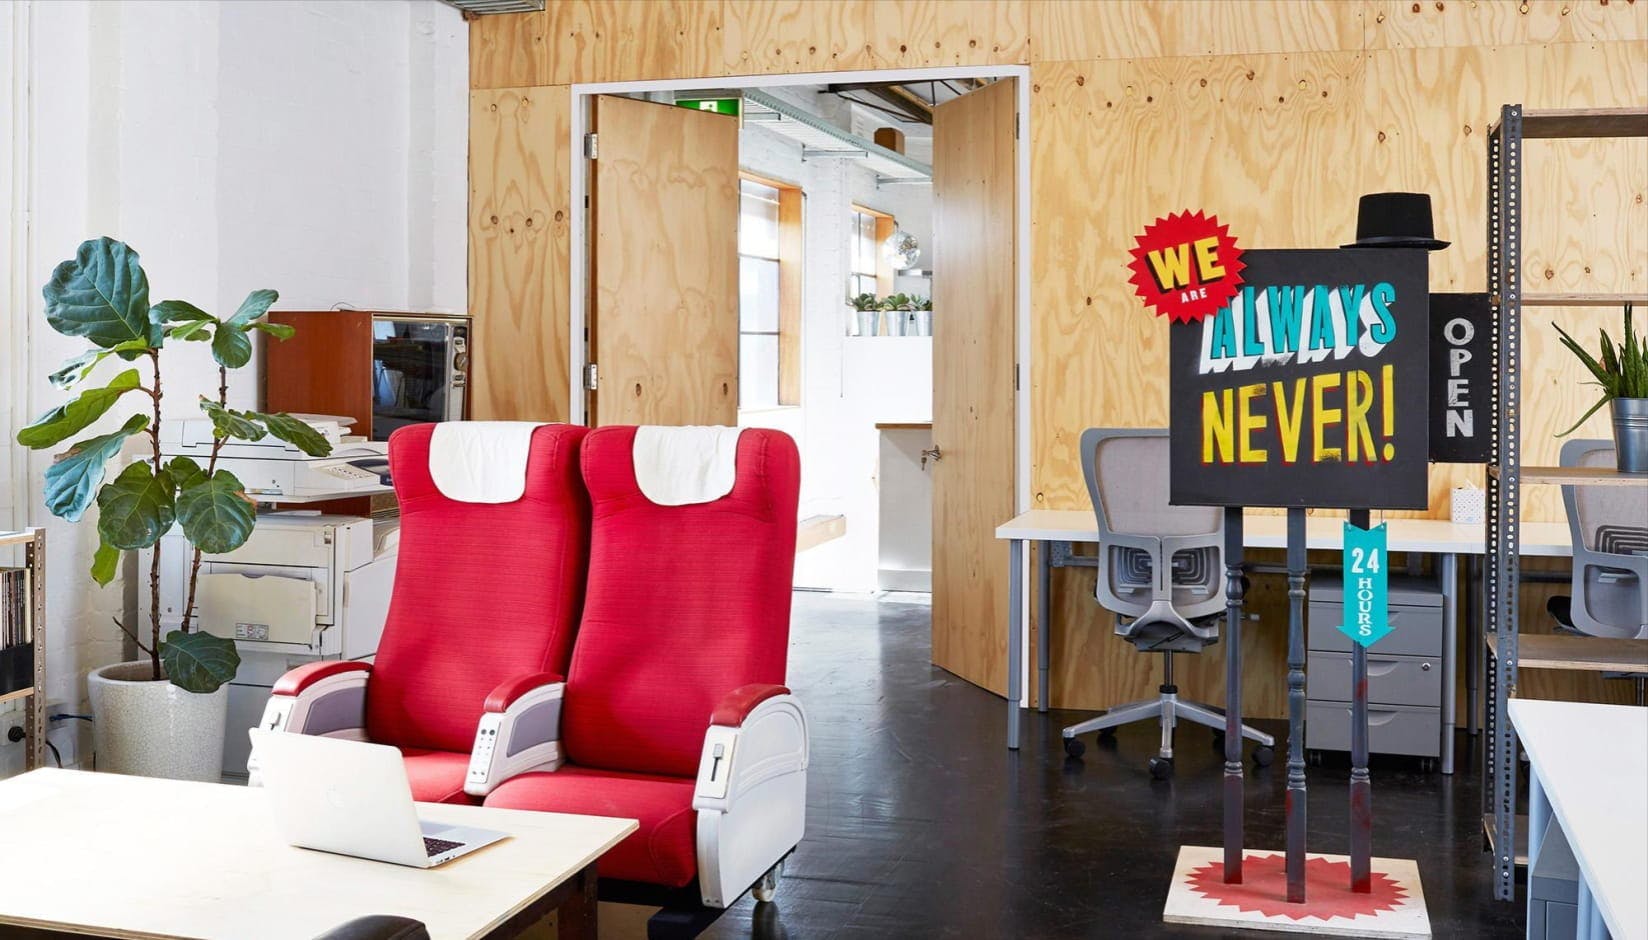 The Roller pet-friendly coworking space